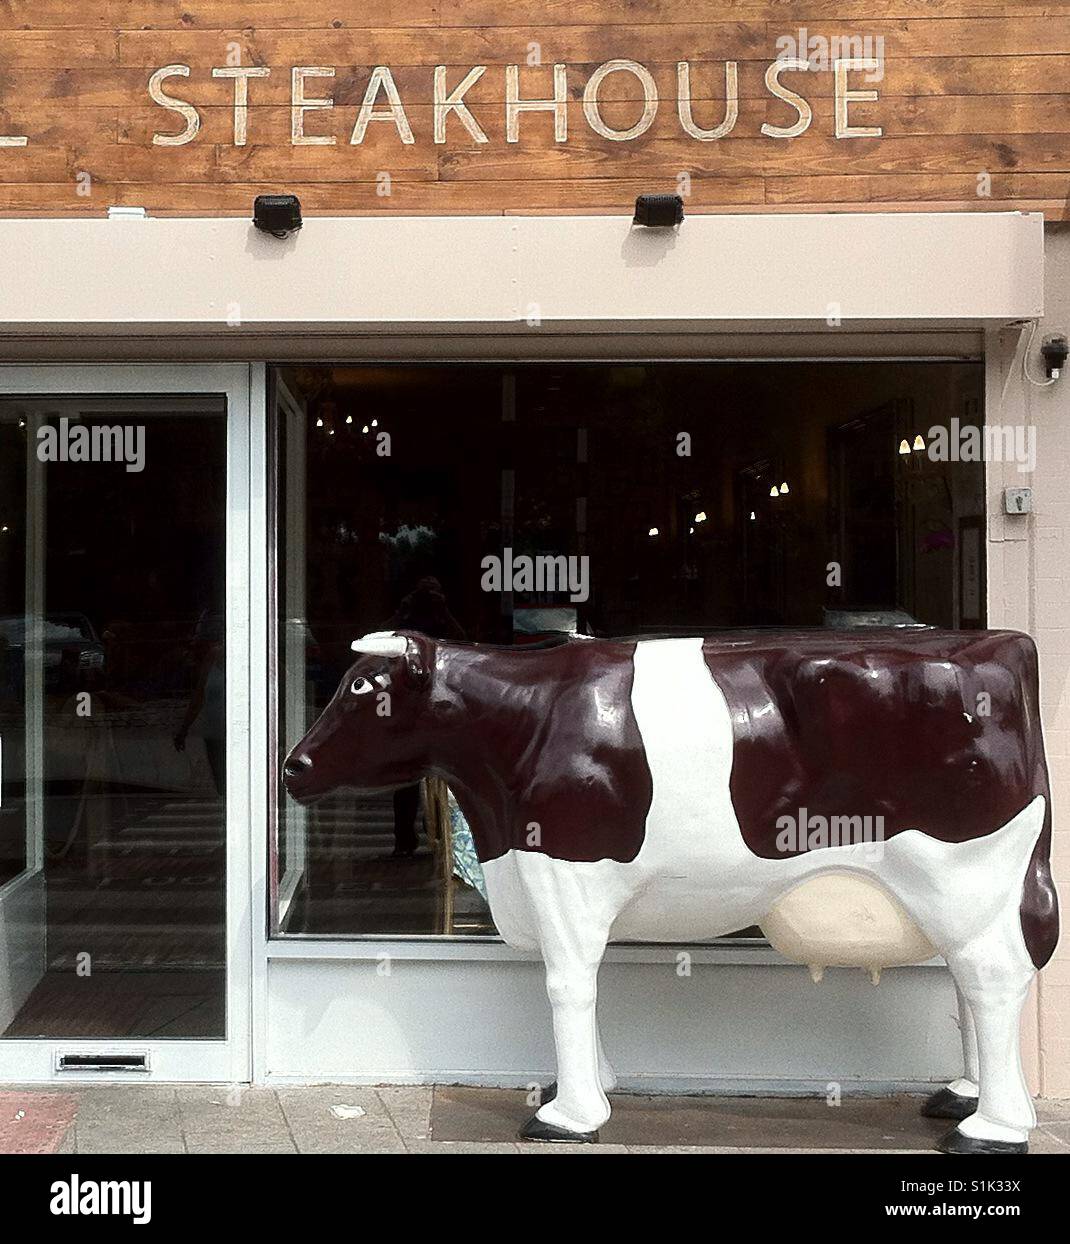 Steakhouse with model cow outside. Stock Photo